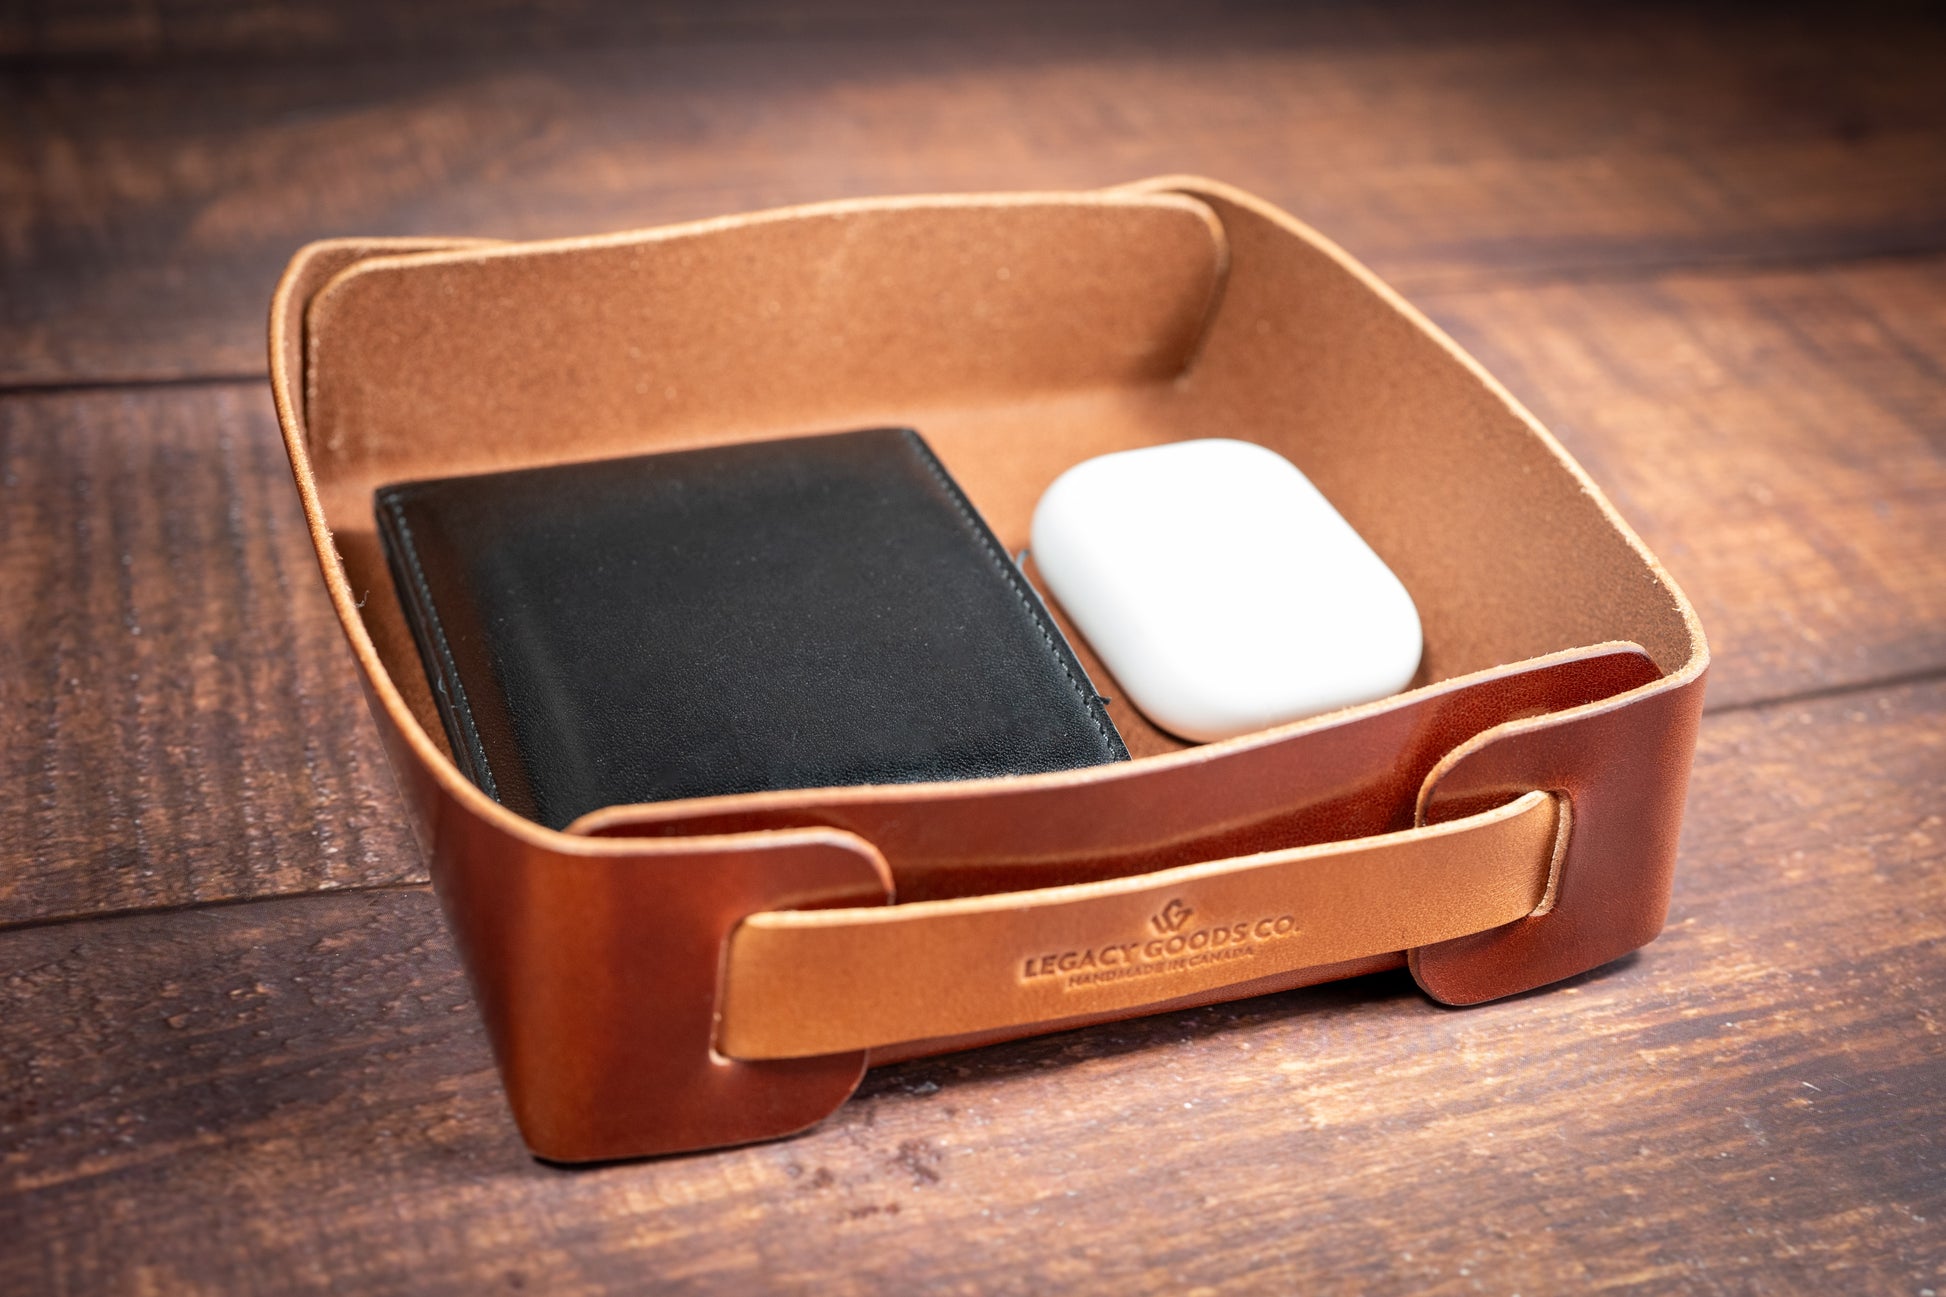 Elegant Chocolate-Colored Vegetable Tanned Leather Tray - A Statement of Sophistication for Your Essentials